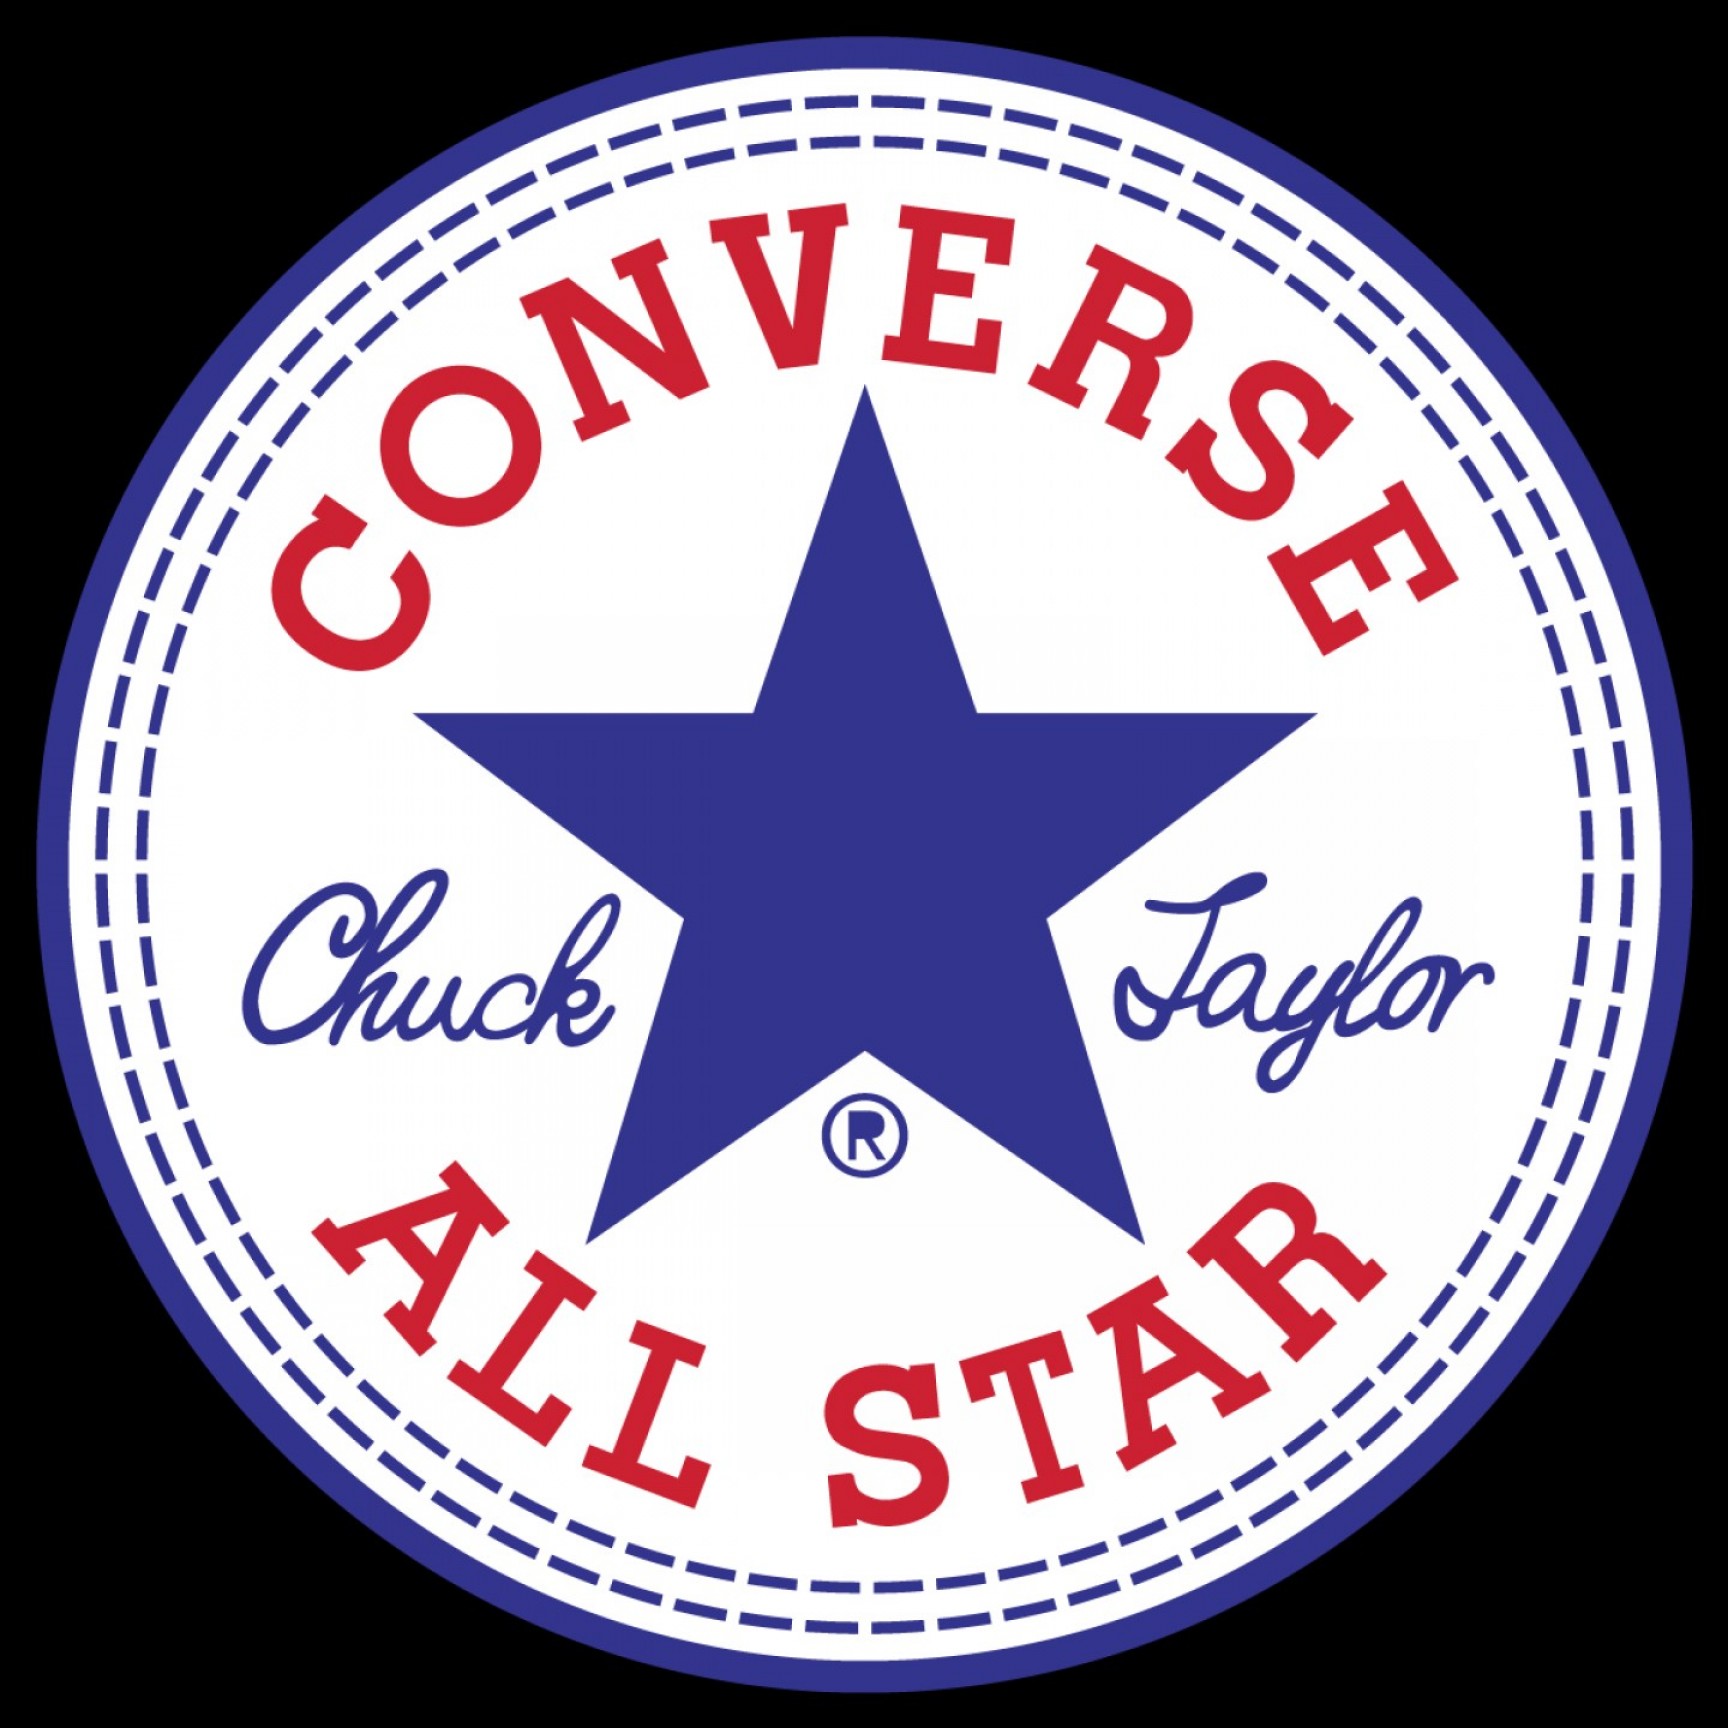 converse all star graphics